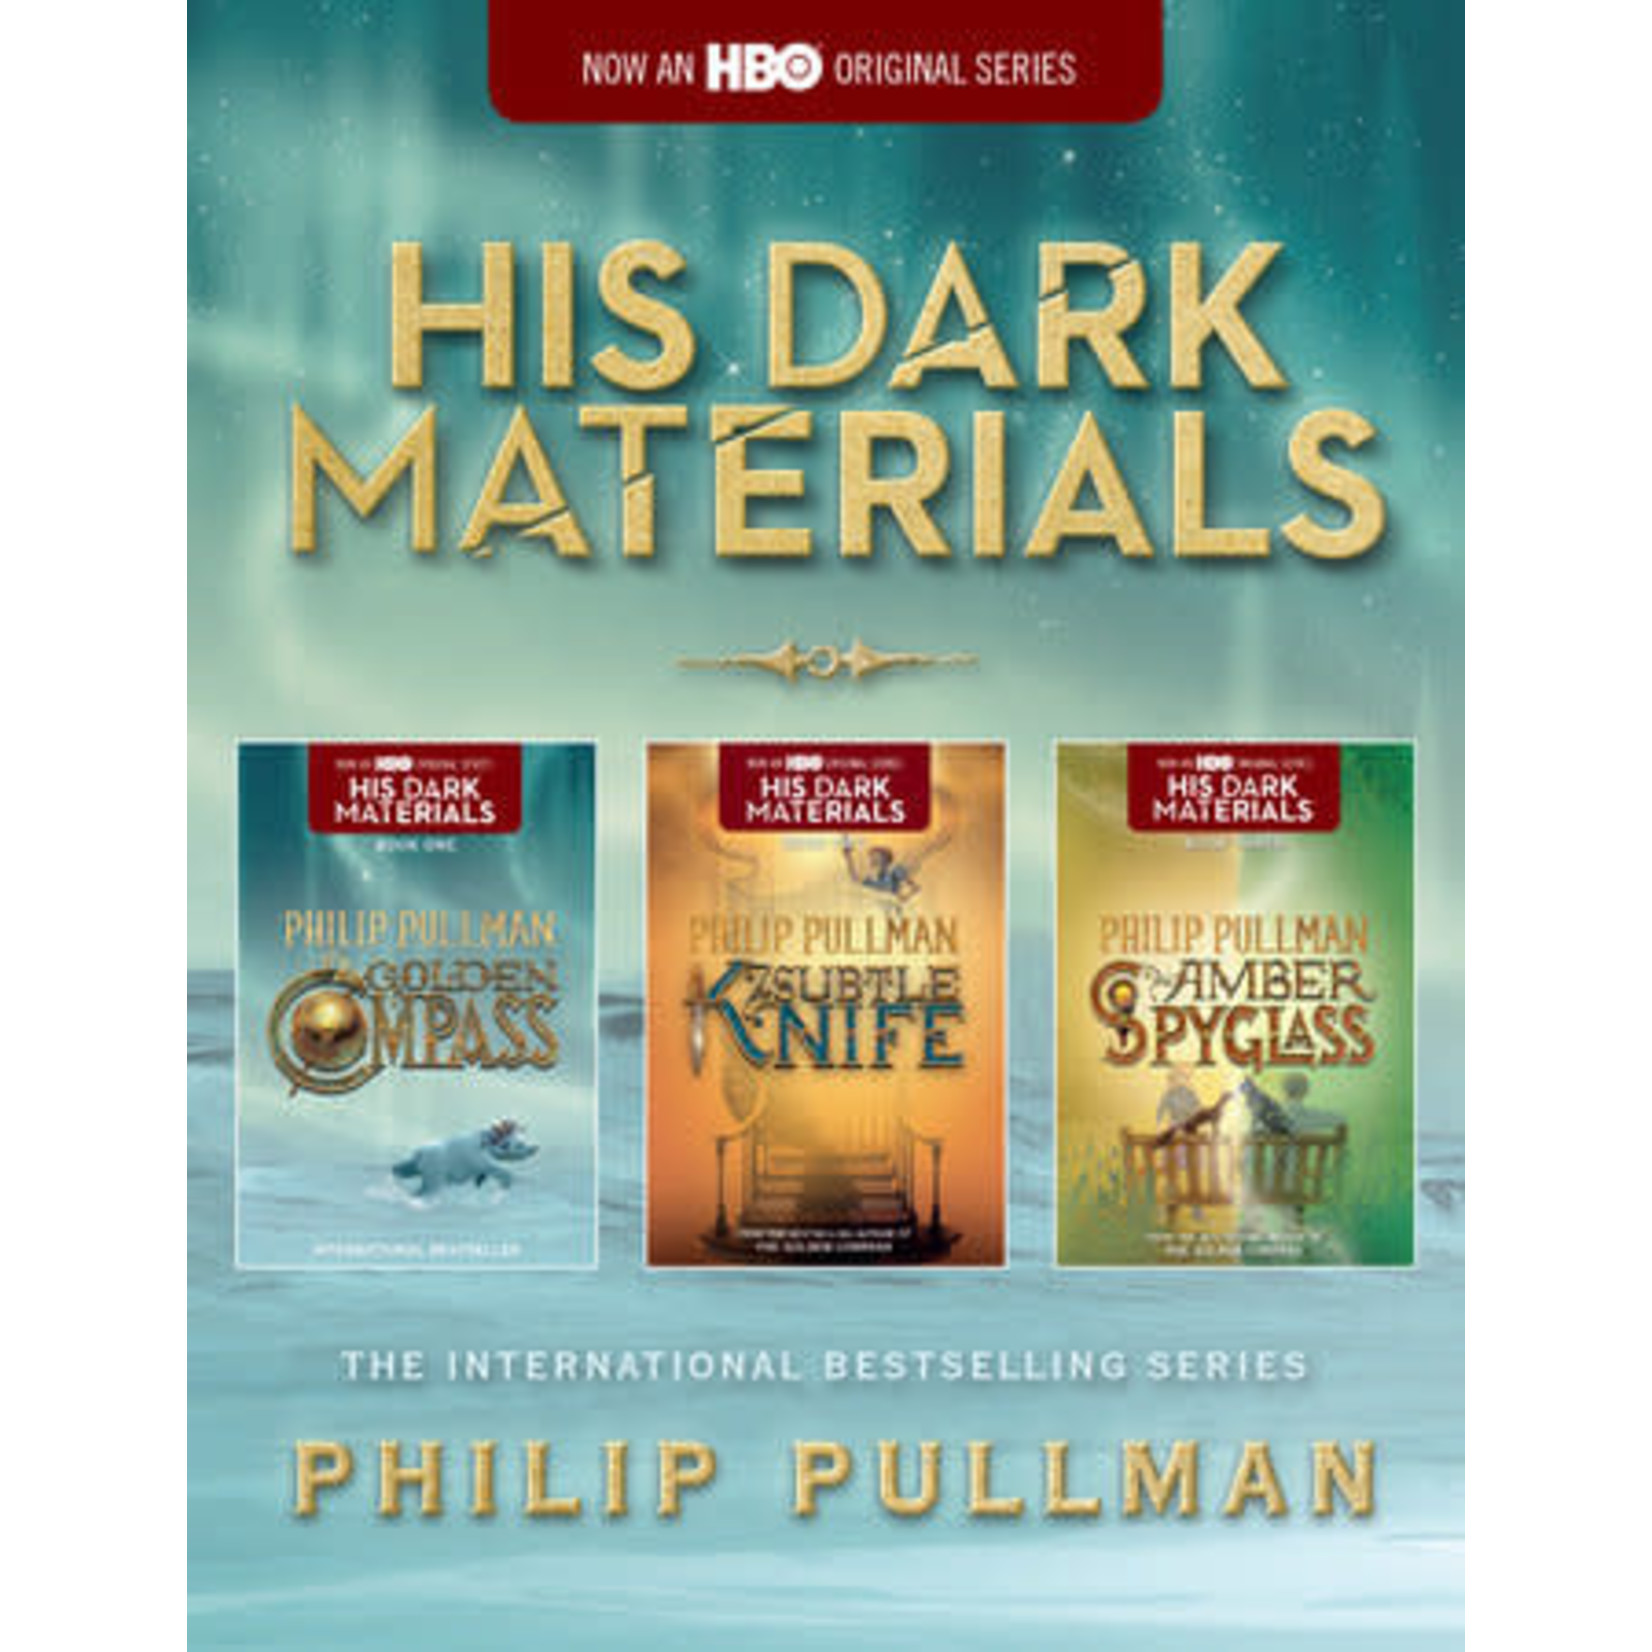 Philip Pullman - His Dark Materials Box Set (The Golden Compass, The Subtle Knife, The Amber Spyglass)